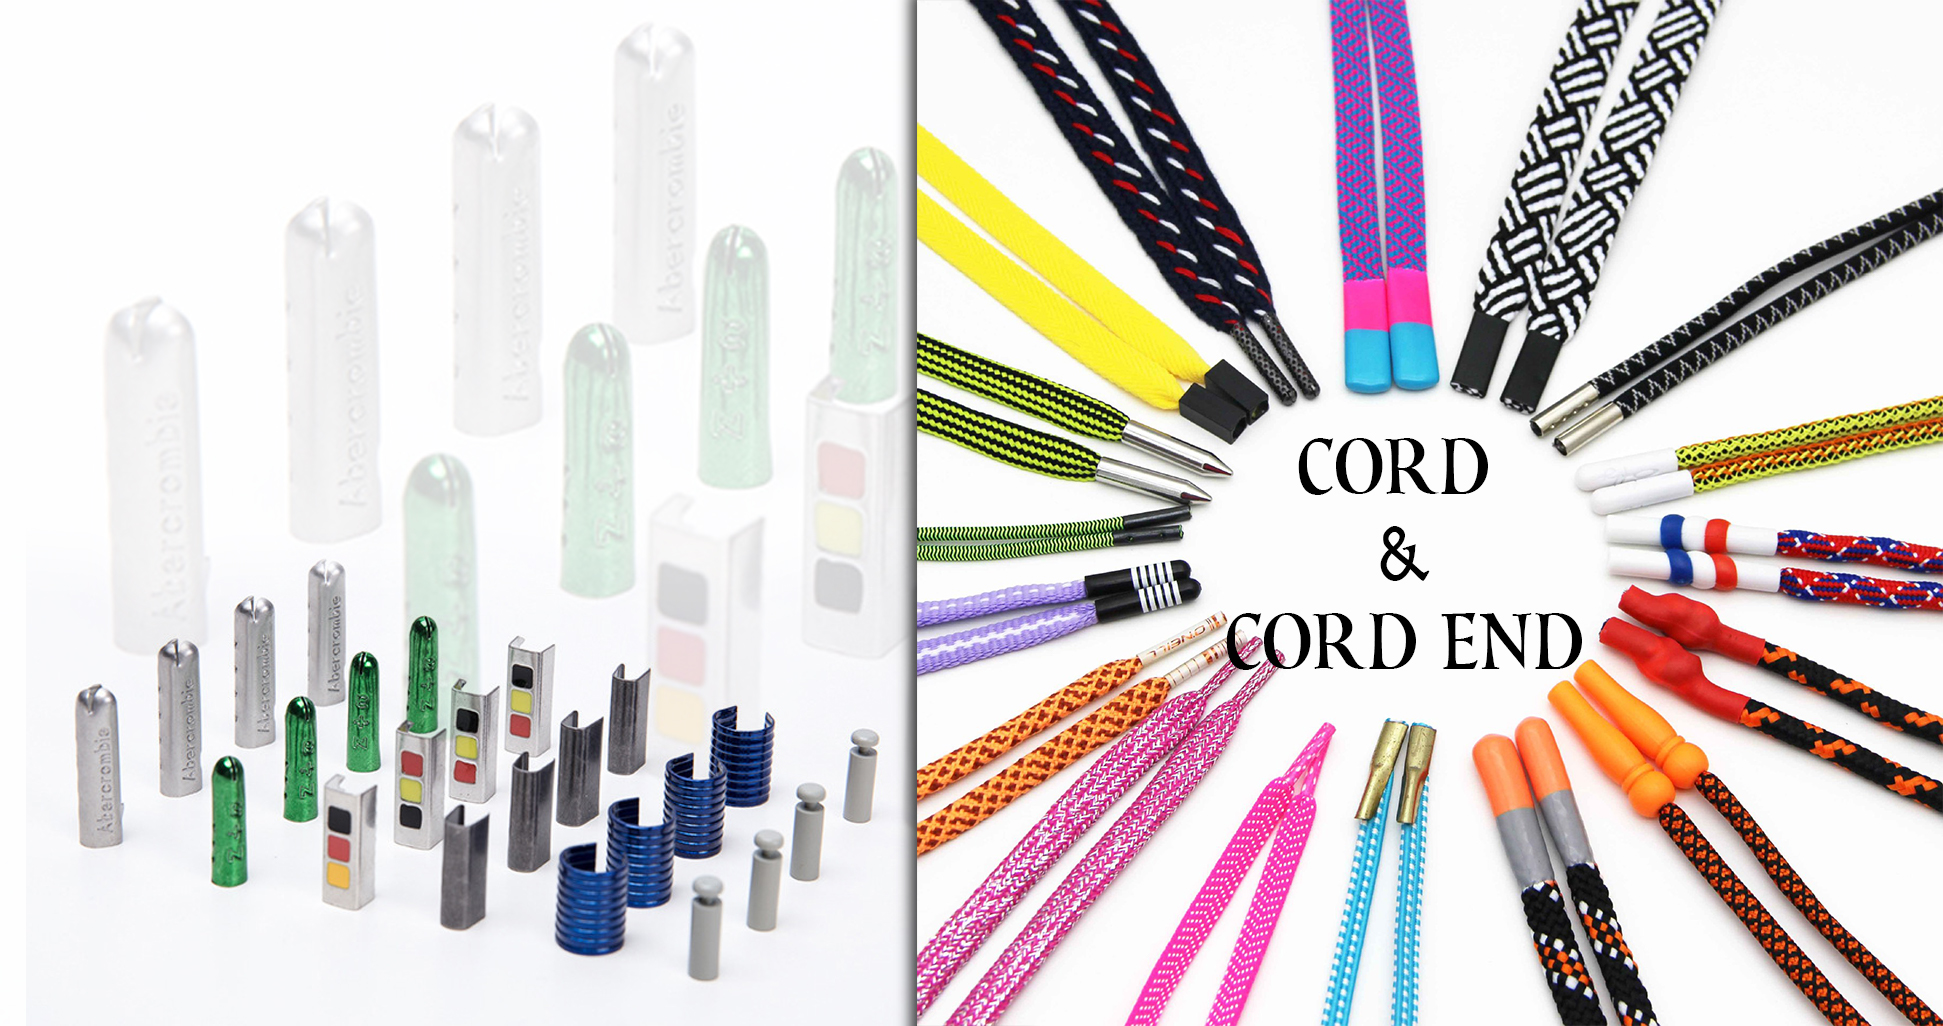 Cord & Cord end